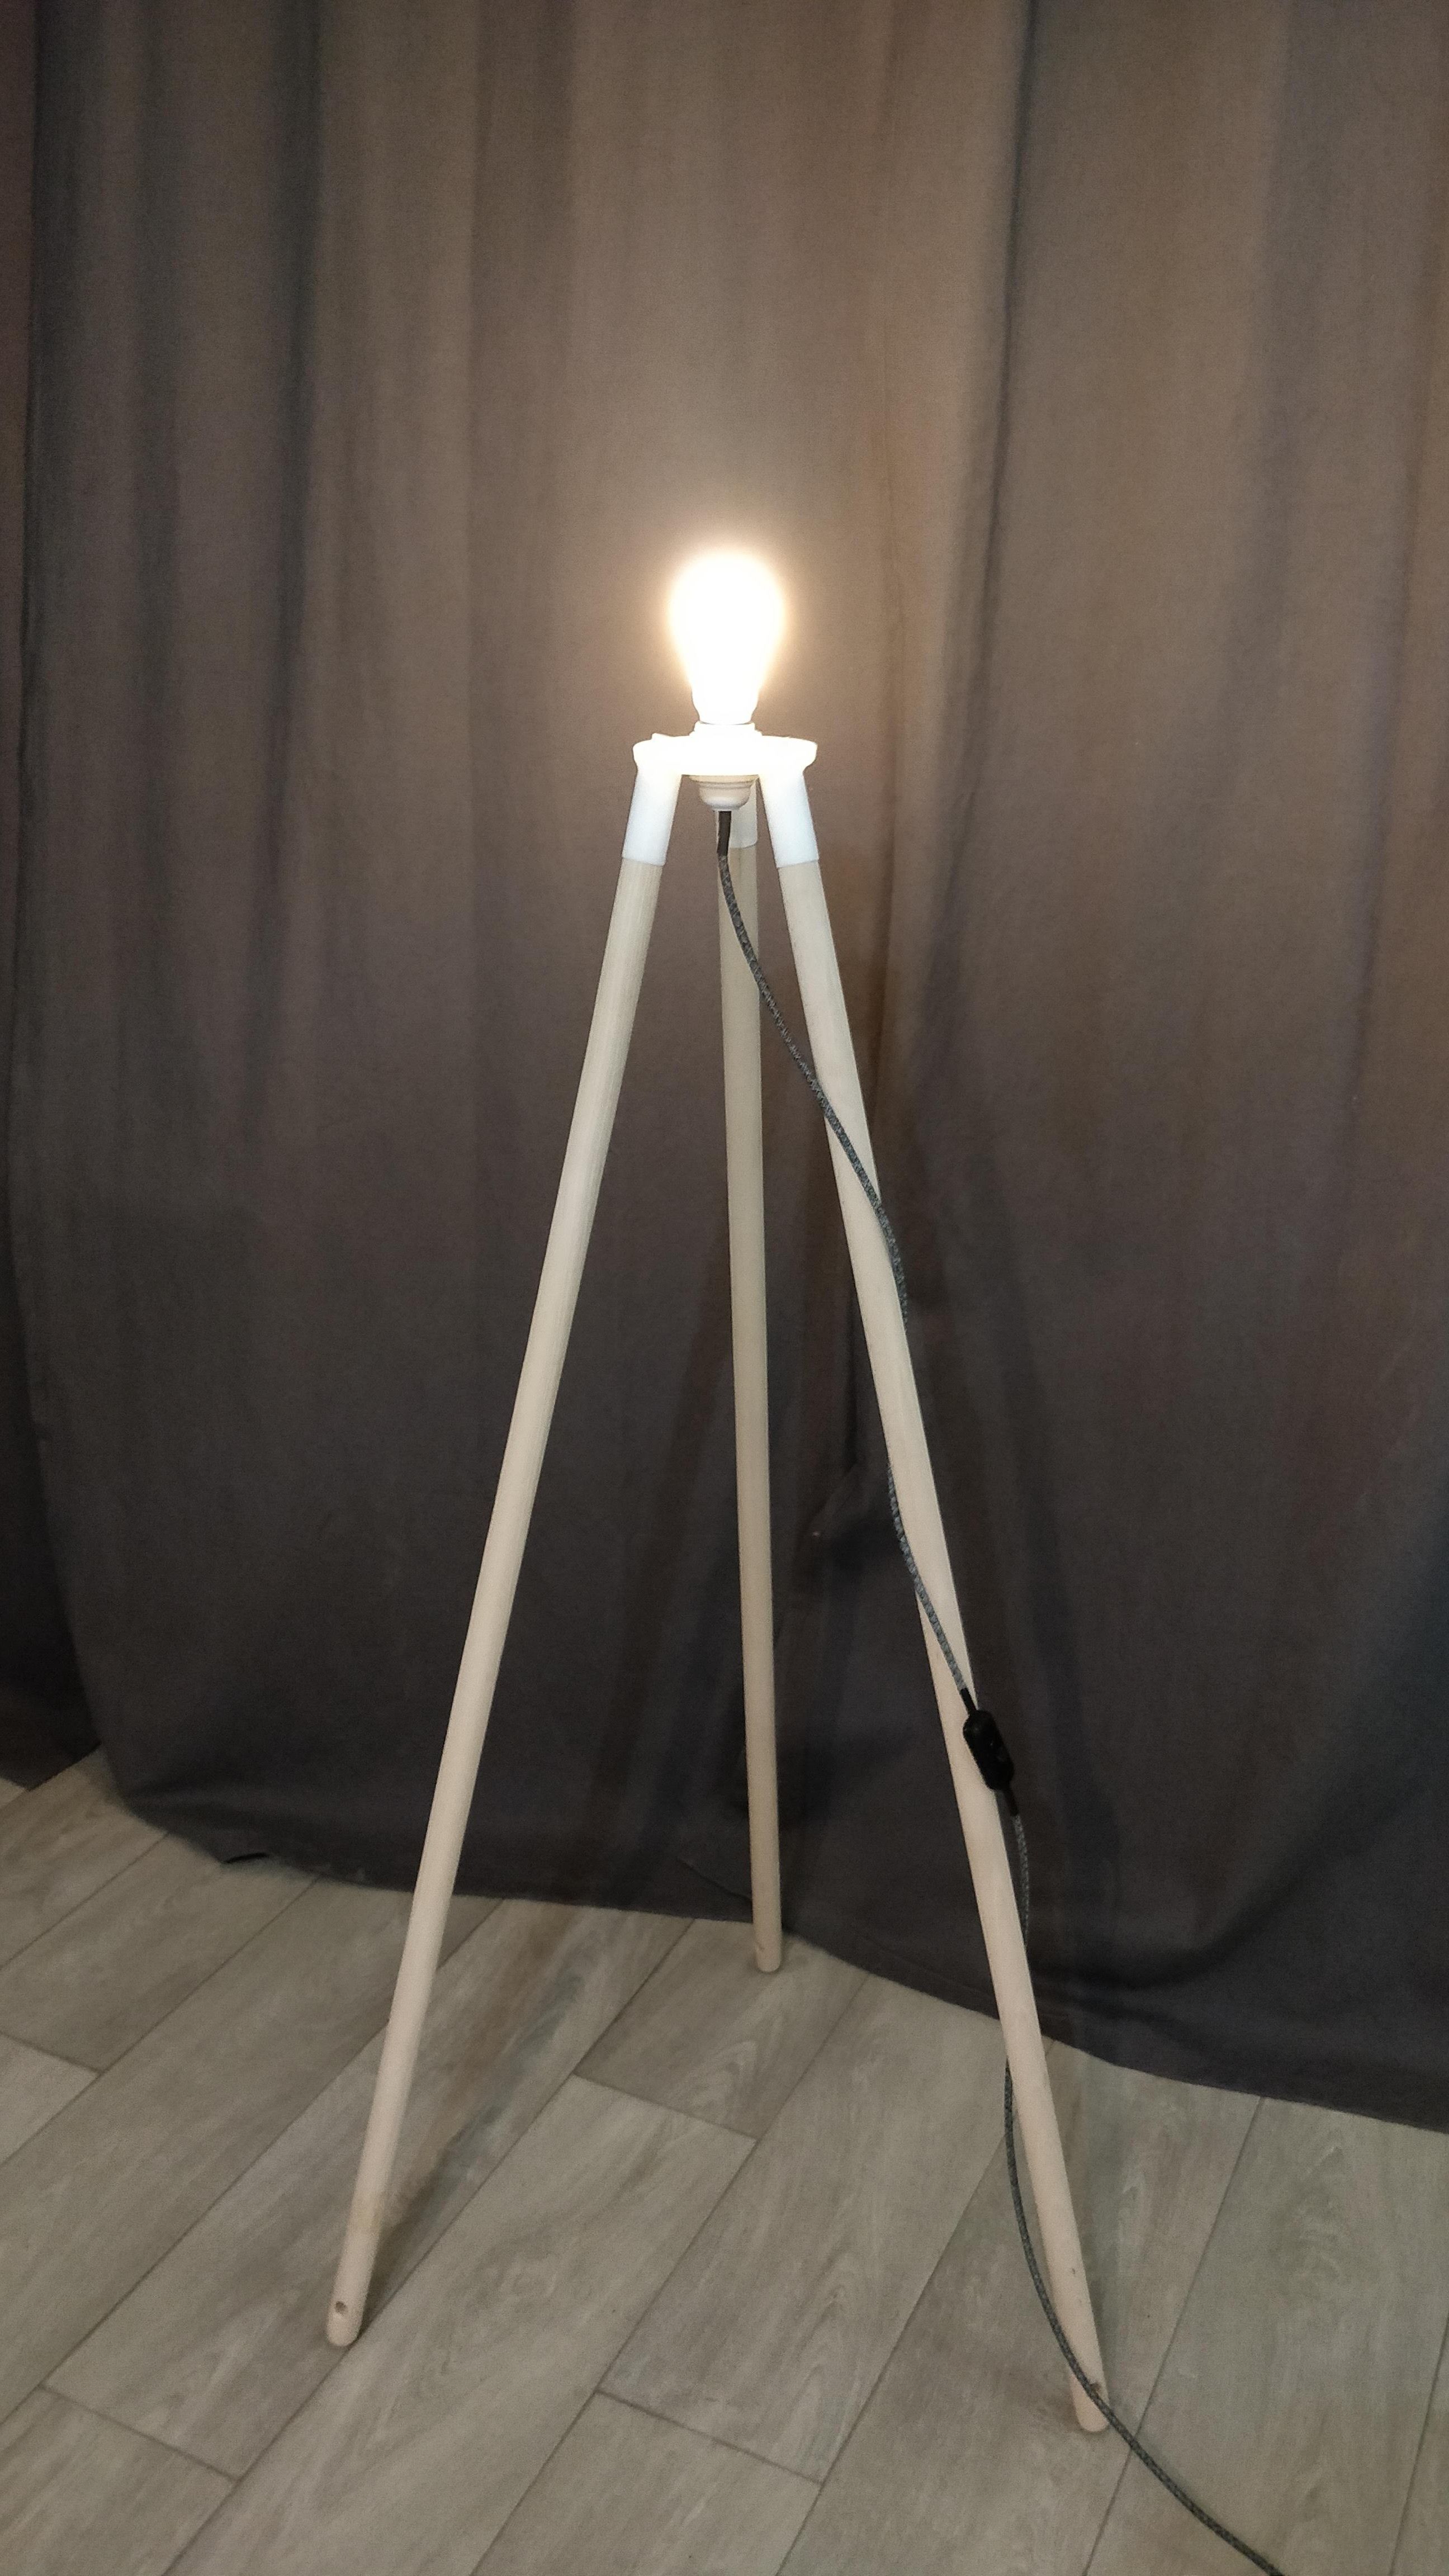 Full_no_lamp-shade.jpg Download STL file Scandinavian lamp • 3D printing object, victor_ourd